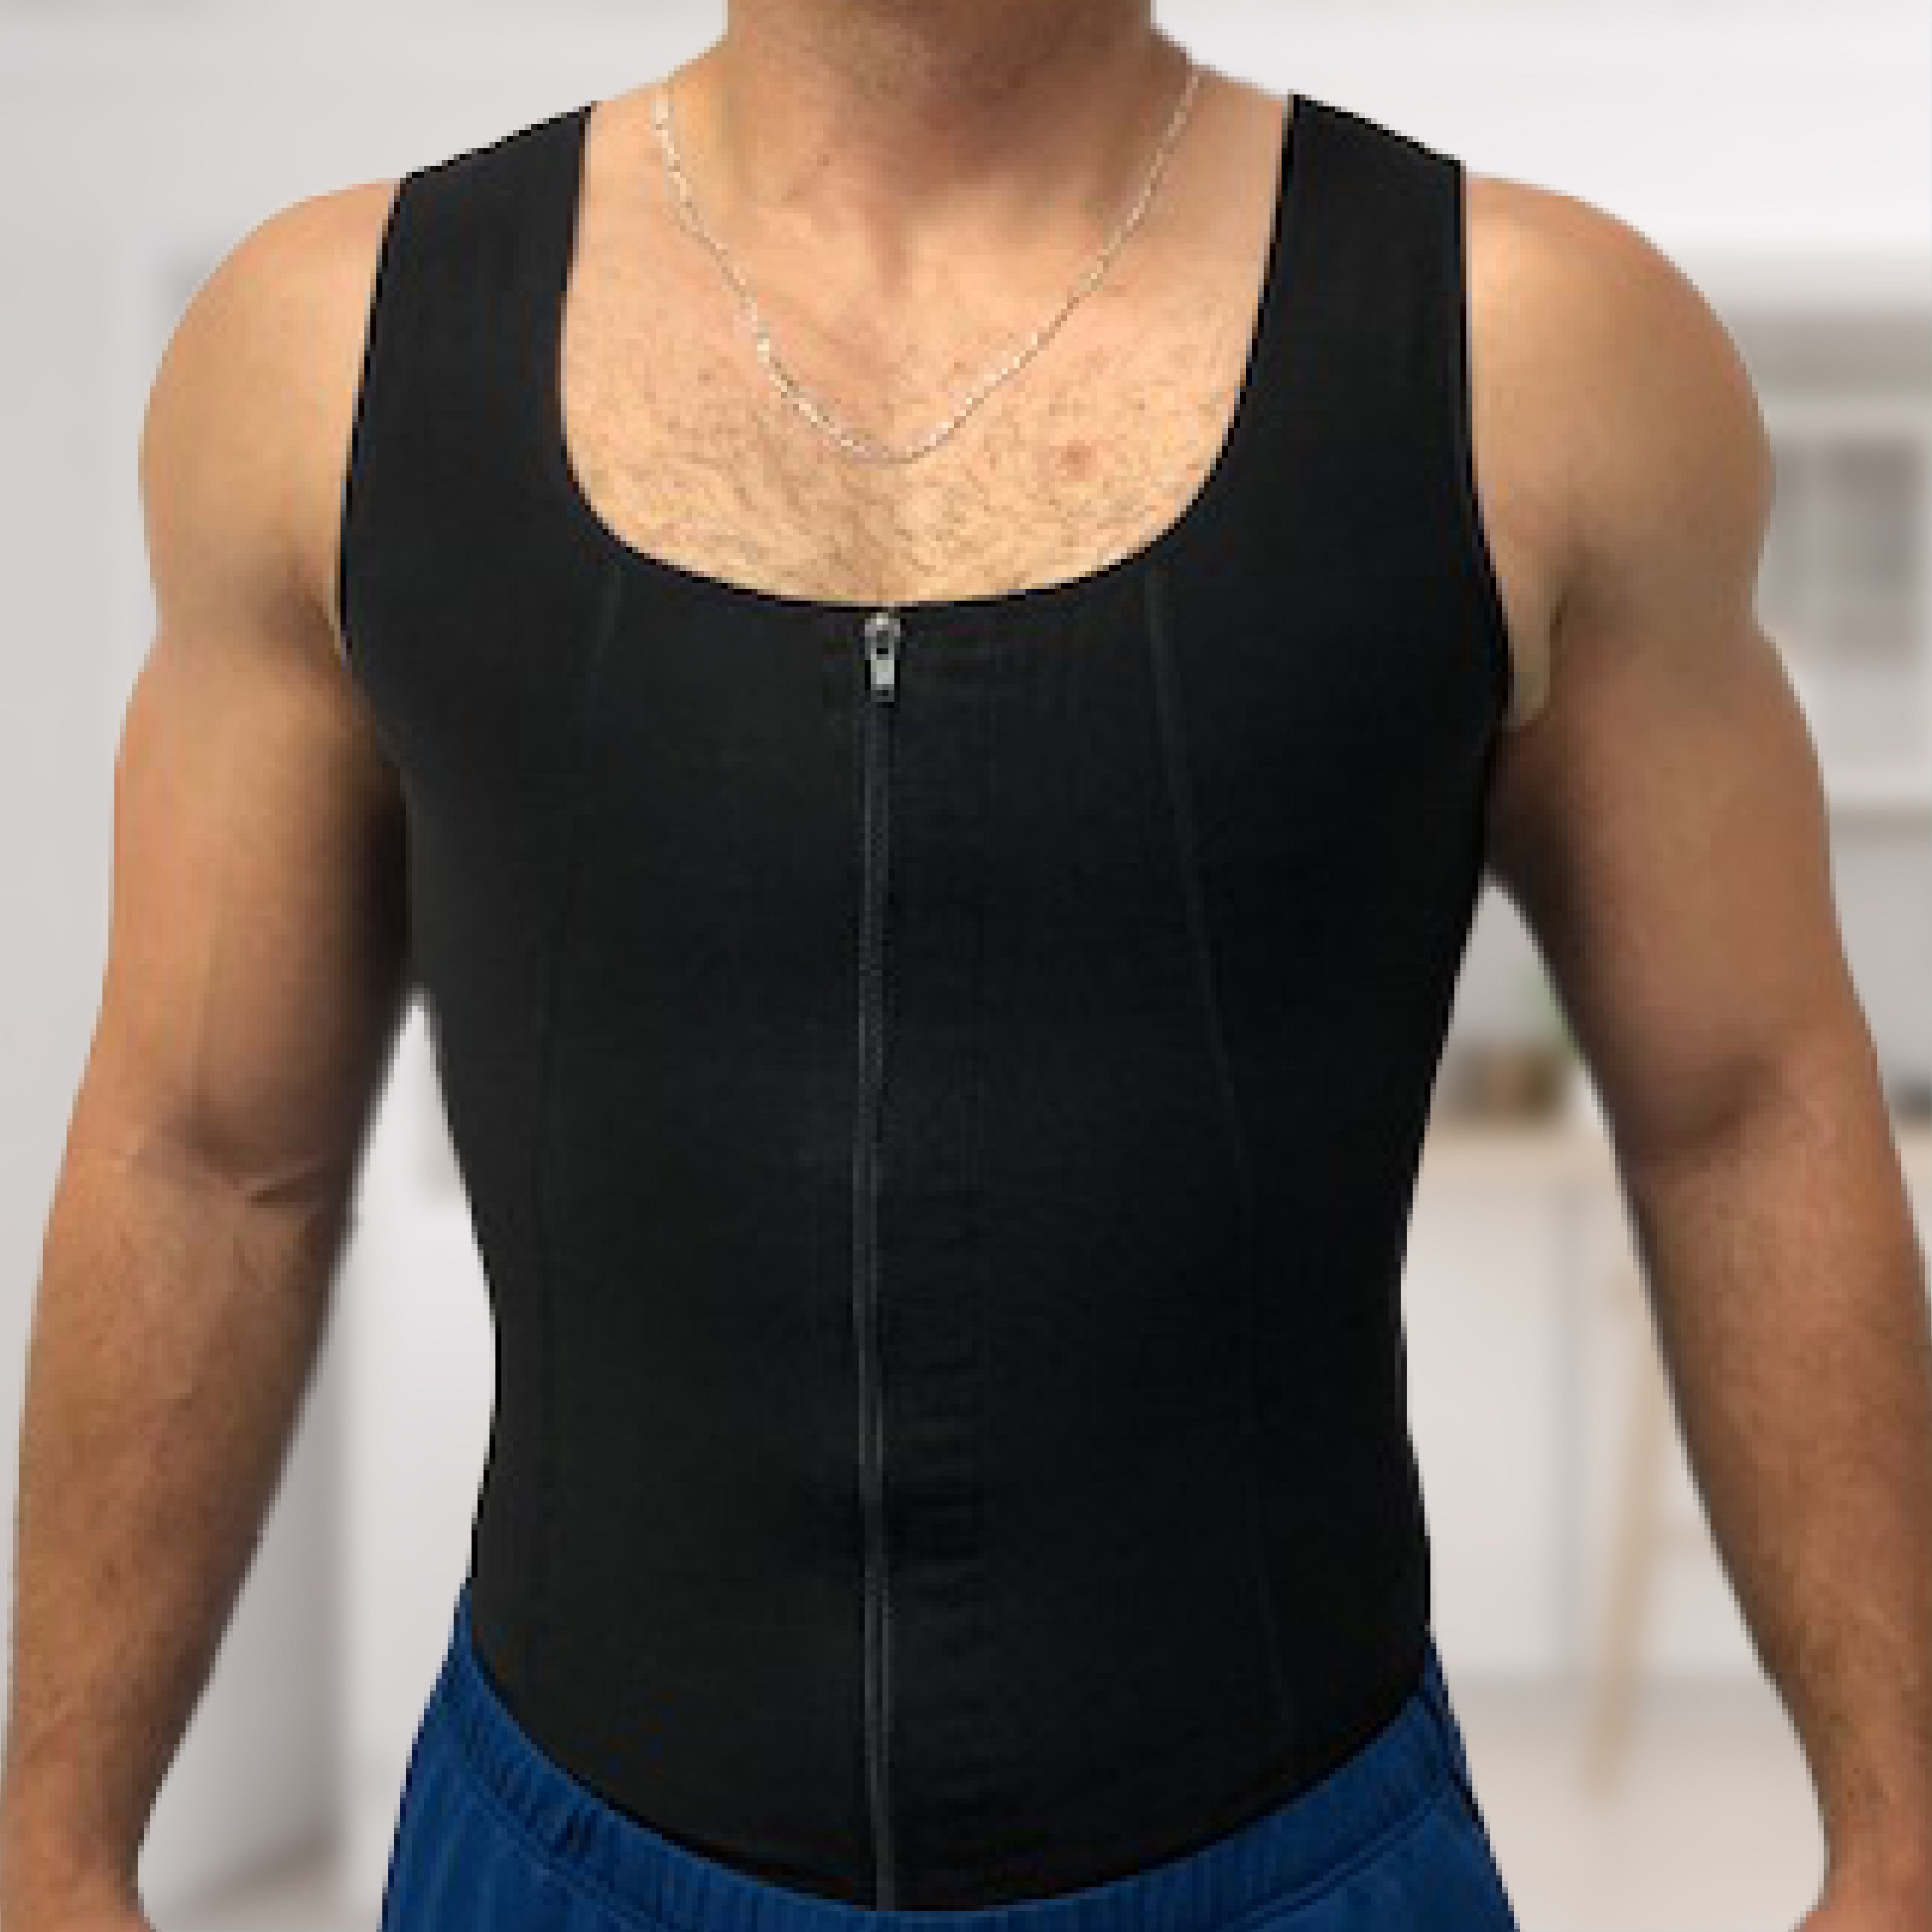 Man with compression vest on in Black - frontal view